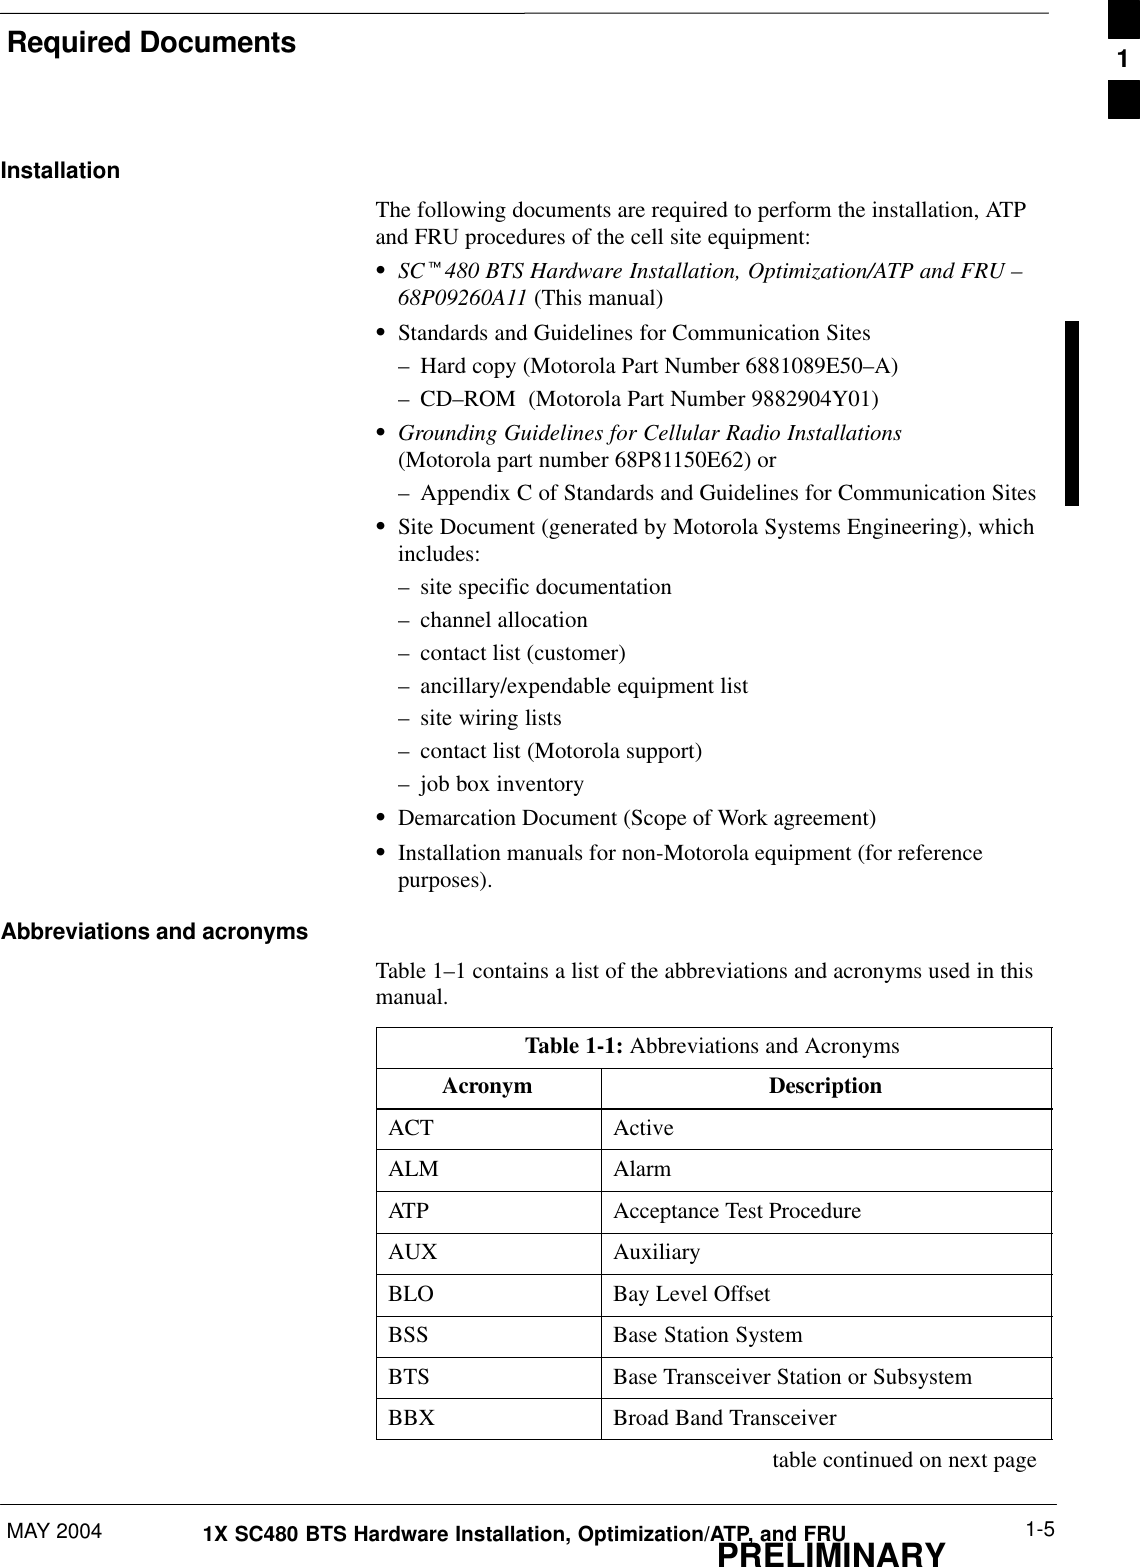 Required DocumentsMAY 2004 1-51X SC480 BTS Hardware Installation, Optimization/ATP, and FRUPRELIMINARYInstallationThe following documents are required to perform the installation, ATPand FRU procedures of the cell site equipment:SSCt480 BTS Hardware Installation, Optimization/ATP and FRU –68P09260A11 (This manual)SStandards and Guidelines for Communication Sites– Hard copy (Motorola Part Number 6881089E50–A)– CD–ROM  (Motorola Part Number 9882904Y01)SGrounding Guidelines for Cellular Radio Installations(Motorola part number 68P81150E62) or– Appendix C of Standards and Guidelines for Communication SitesSSite Document (generated by Motorola Systems Engineering), whichincludes:– site specific documentation– channel allocation– contact list (customer)– ancillary/expendable equipment list– site wiring lists– contact list (Motorola support)– job box inventorySDemarcation Document (Scope of Work agreement)SInstallation manuals for non-Motorola equipment (for referencepurposes).Abbreviations and acronymsTable 1–1 contains a list of the abbreviations and acronyms used in thismanual.Table 1-1: Abbreviations and AcronymsAcronym DescriptionACT ActiveALM AlarmATP Acceptance Test ProcedureAUX AuxiliaryBLO Bay Level OffsetBSS Base Station SystemBTS Base Transceiver Station or SubsystemBBX Broad Band Transceivertable continued on next page1